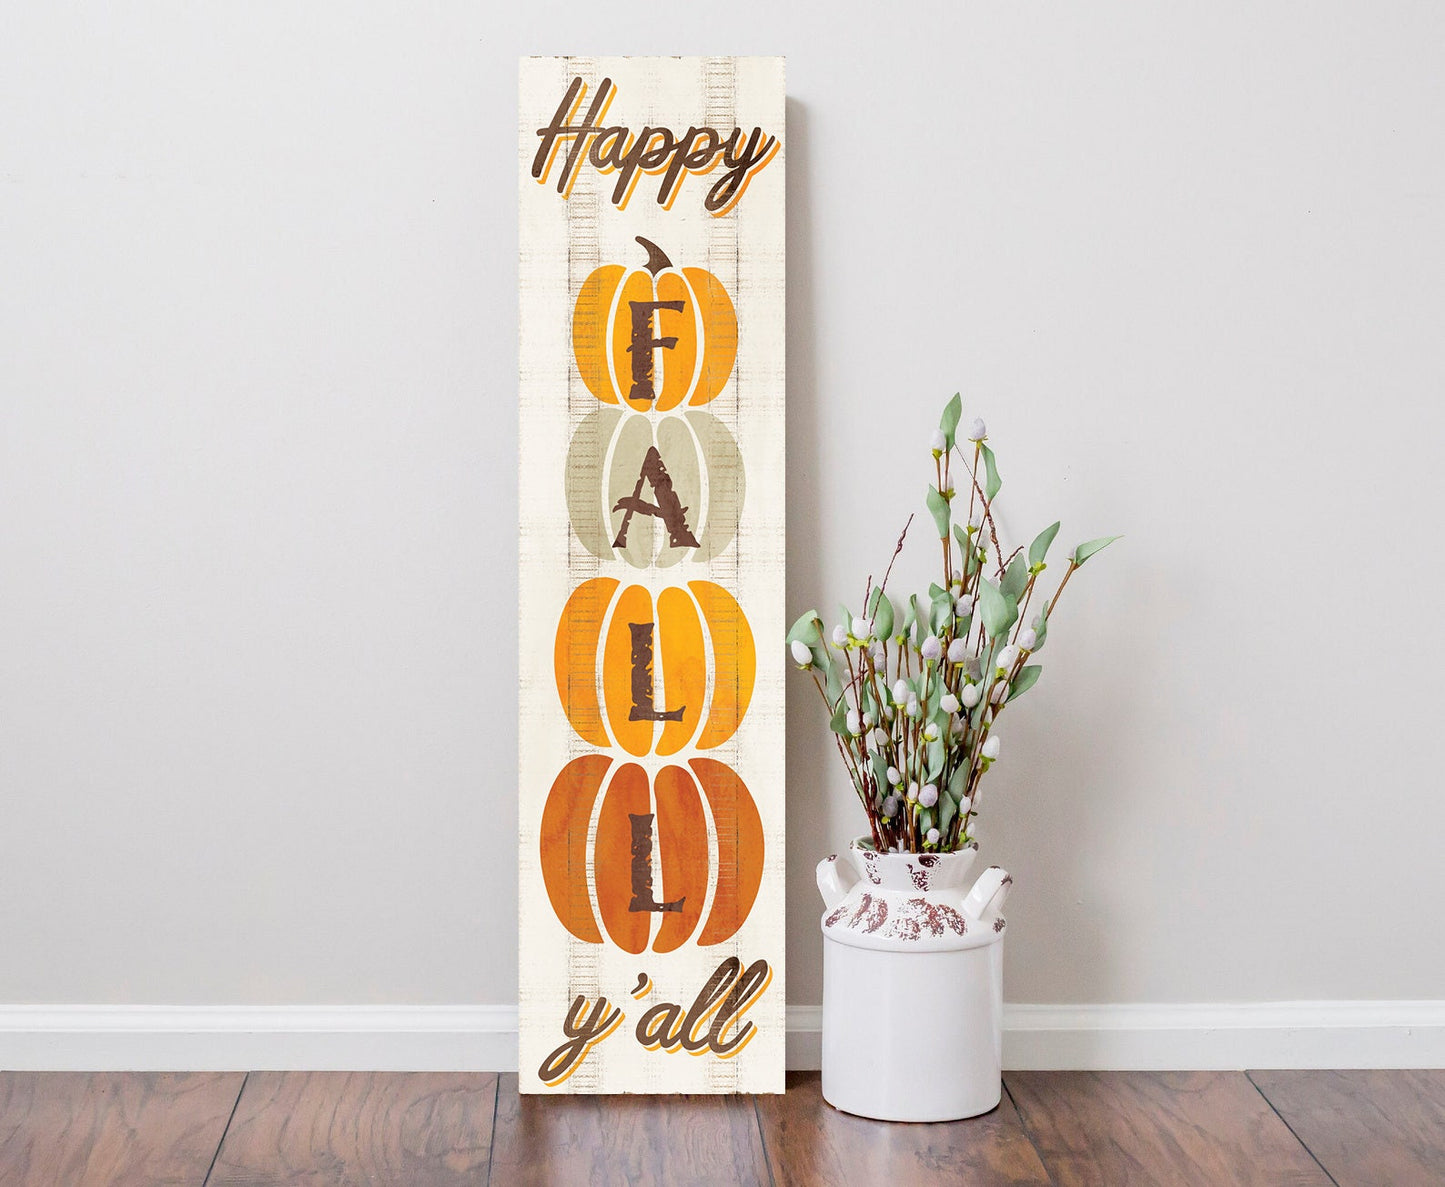 36in "Happy Fall Y'all" Wooden Porch Sign Seasonal Front Door Display | Perfect for Autumn Celebrations | Rustic Decor